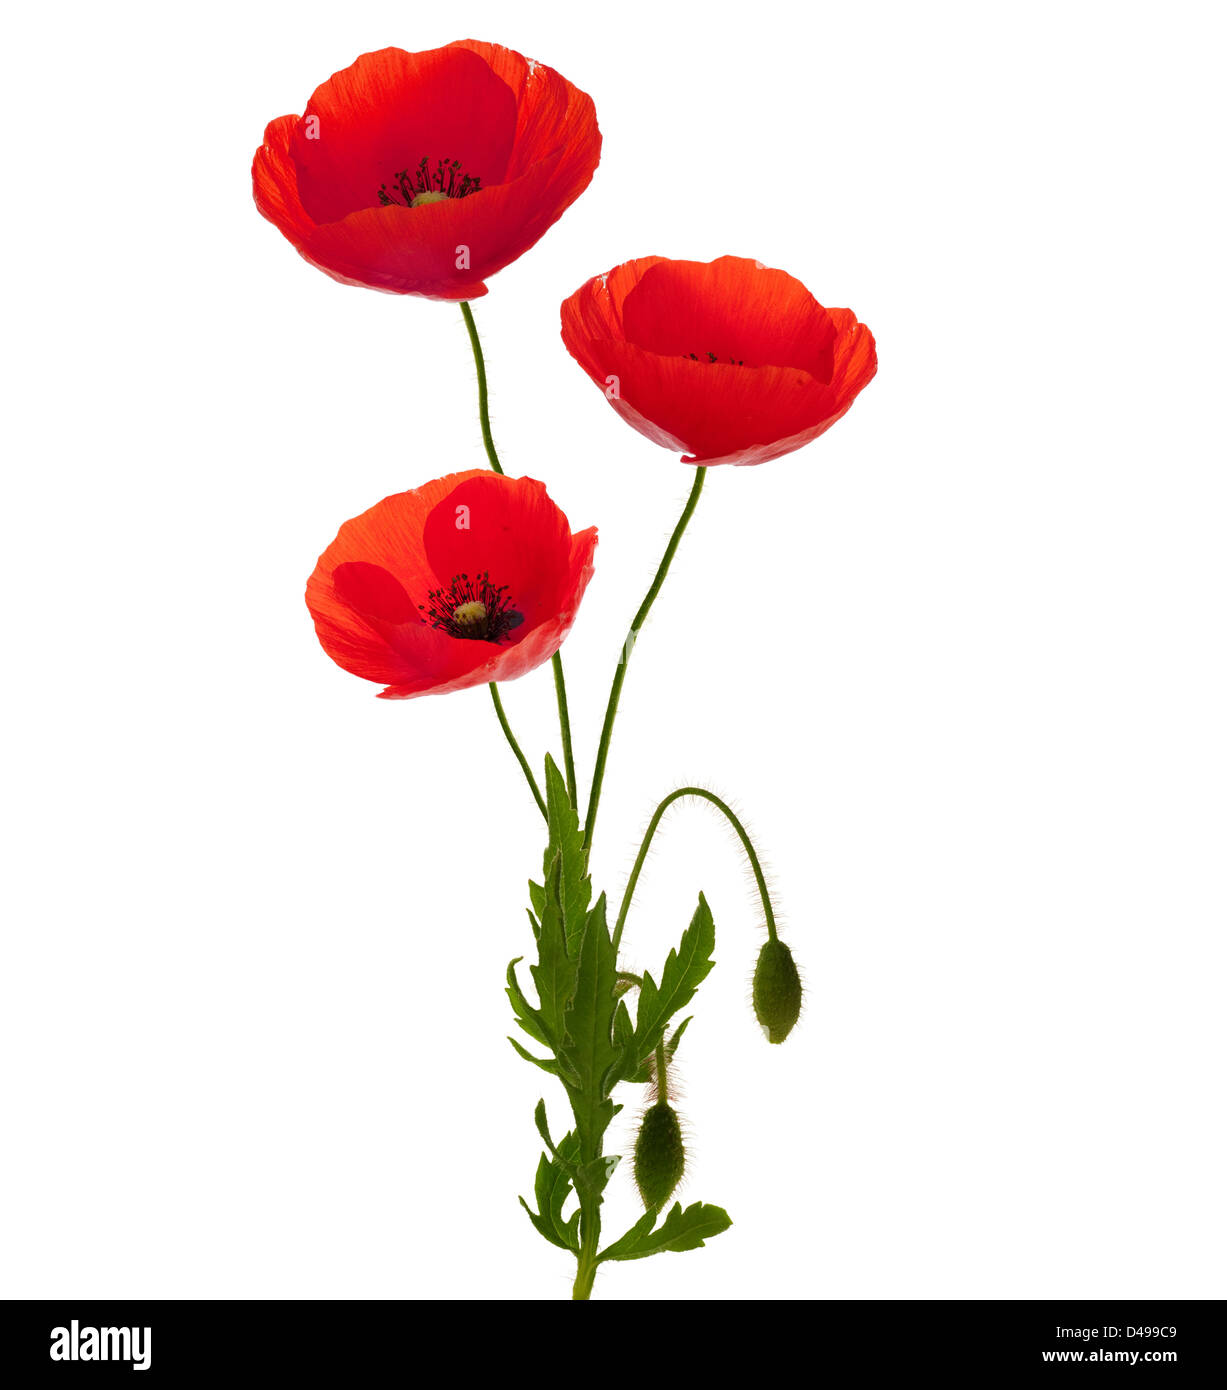 3 poppies bouquet over white background, entire plant with green foliage and red petals Stock Photo